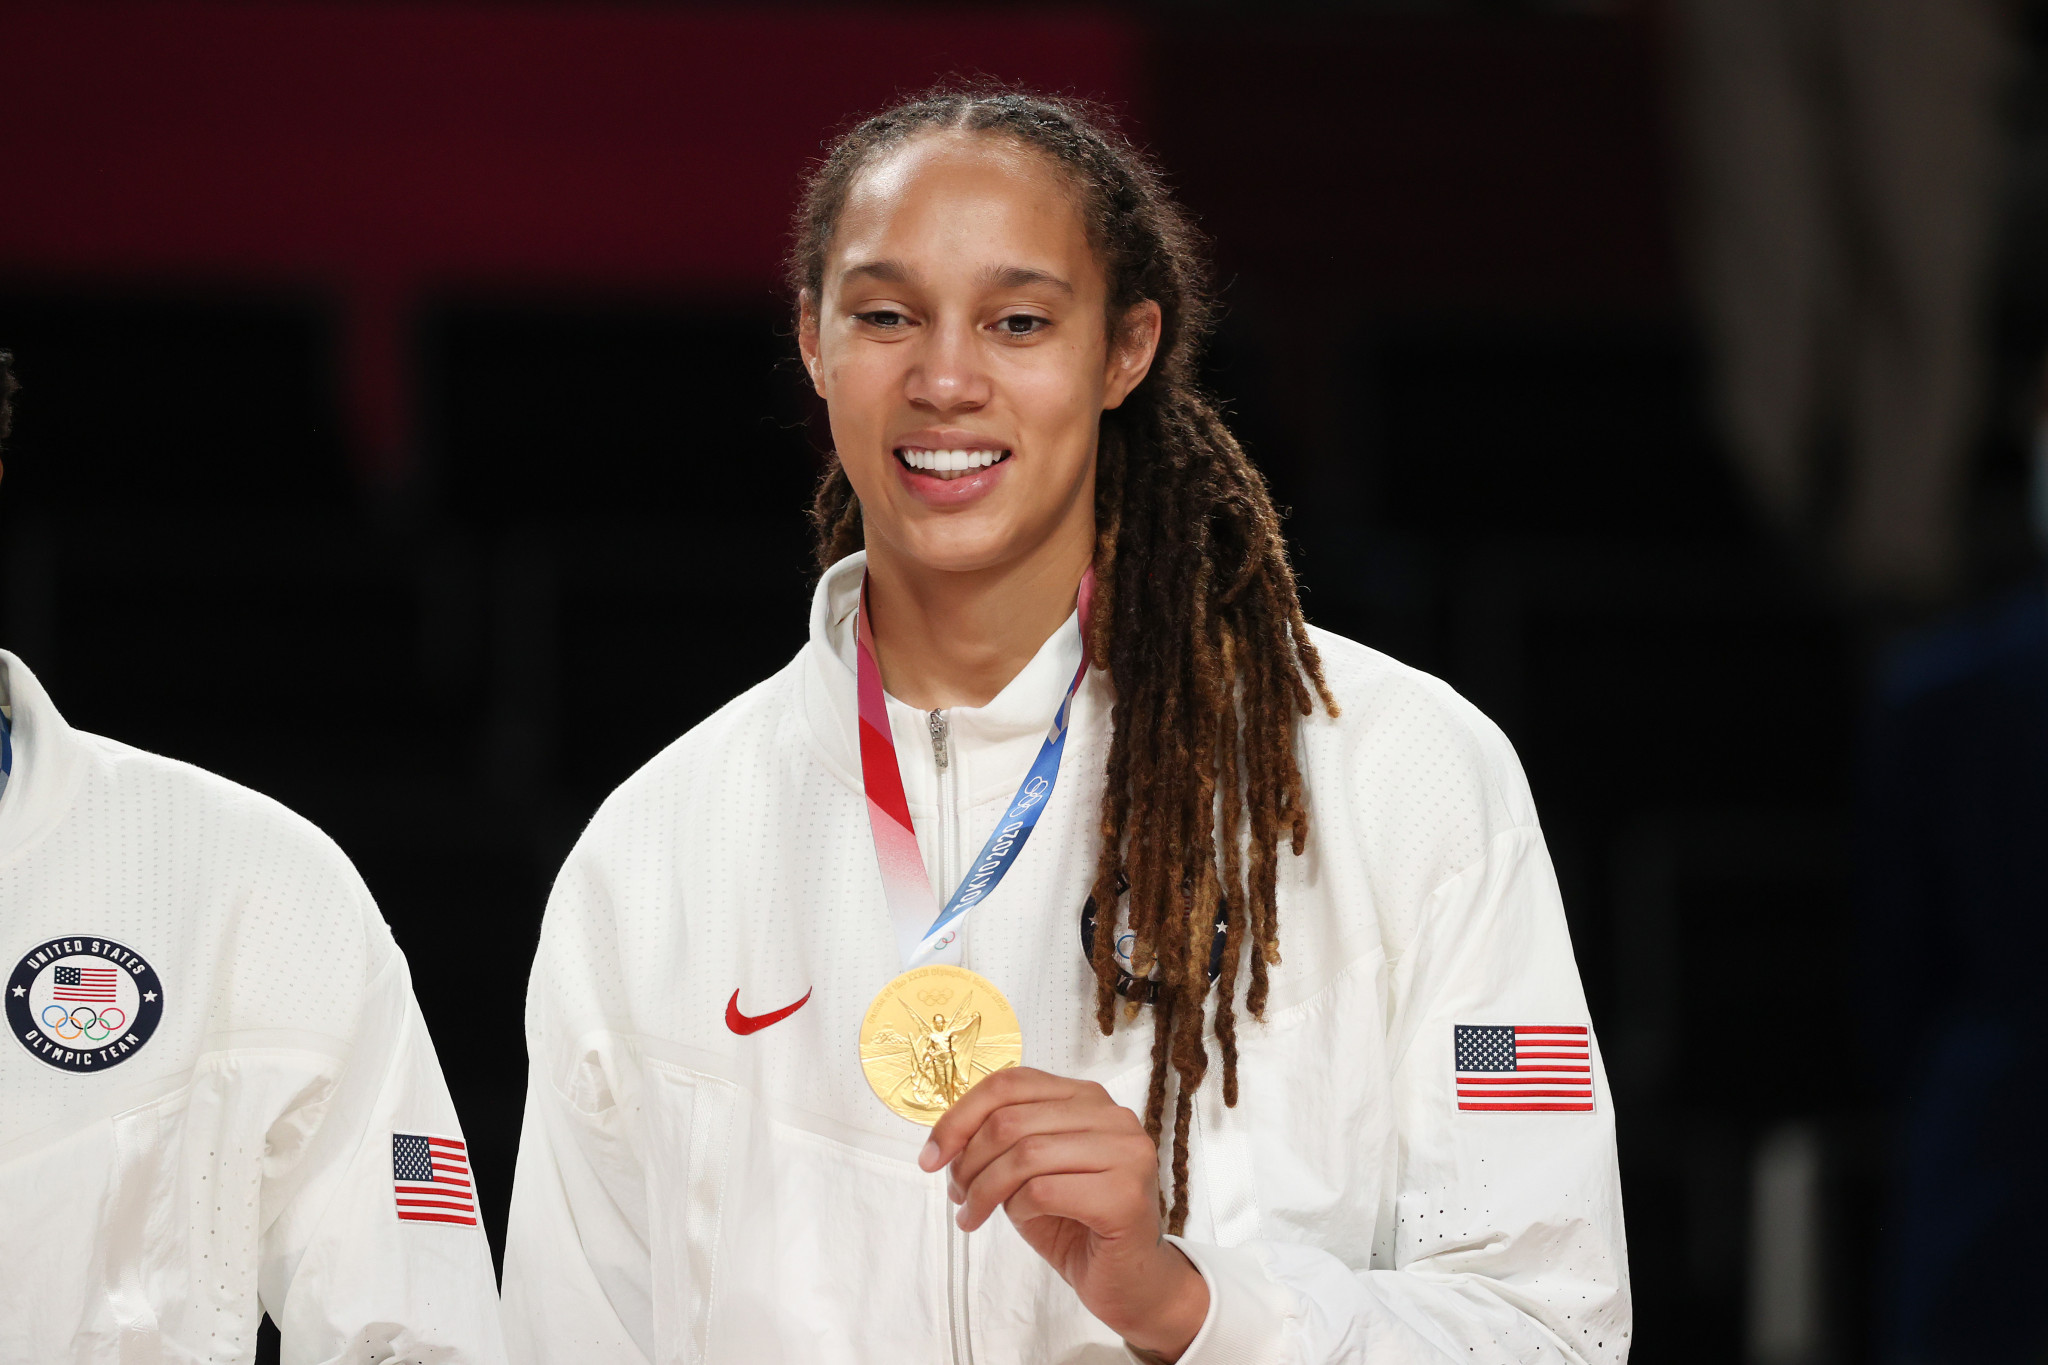 Brittney Griner helped the US win women's basketball gold at Rio 2016 and Tokyo 2020 ©Getty Images